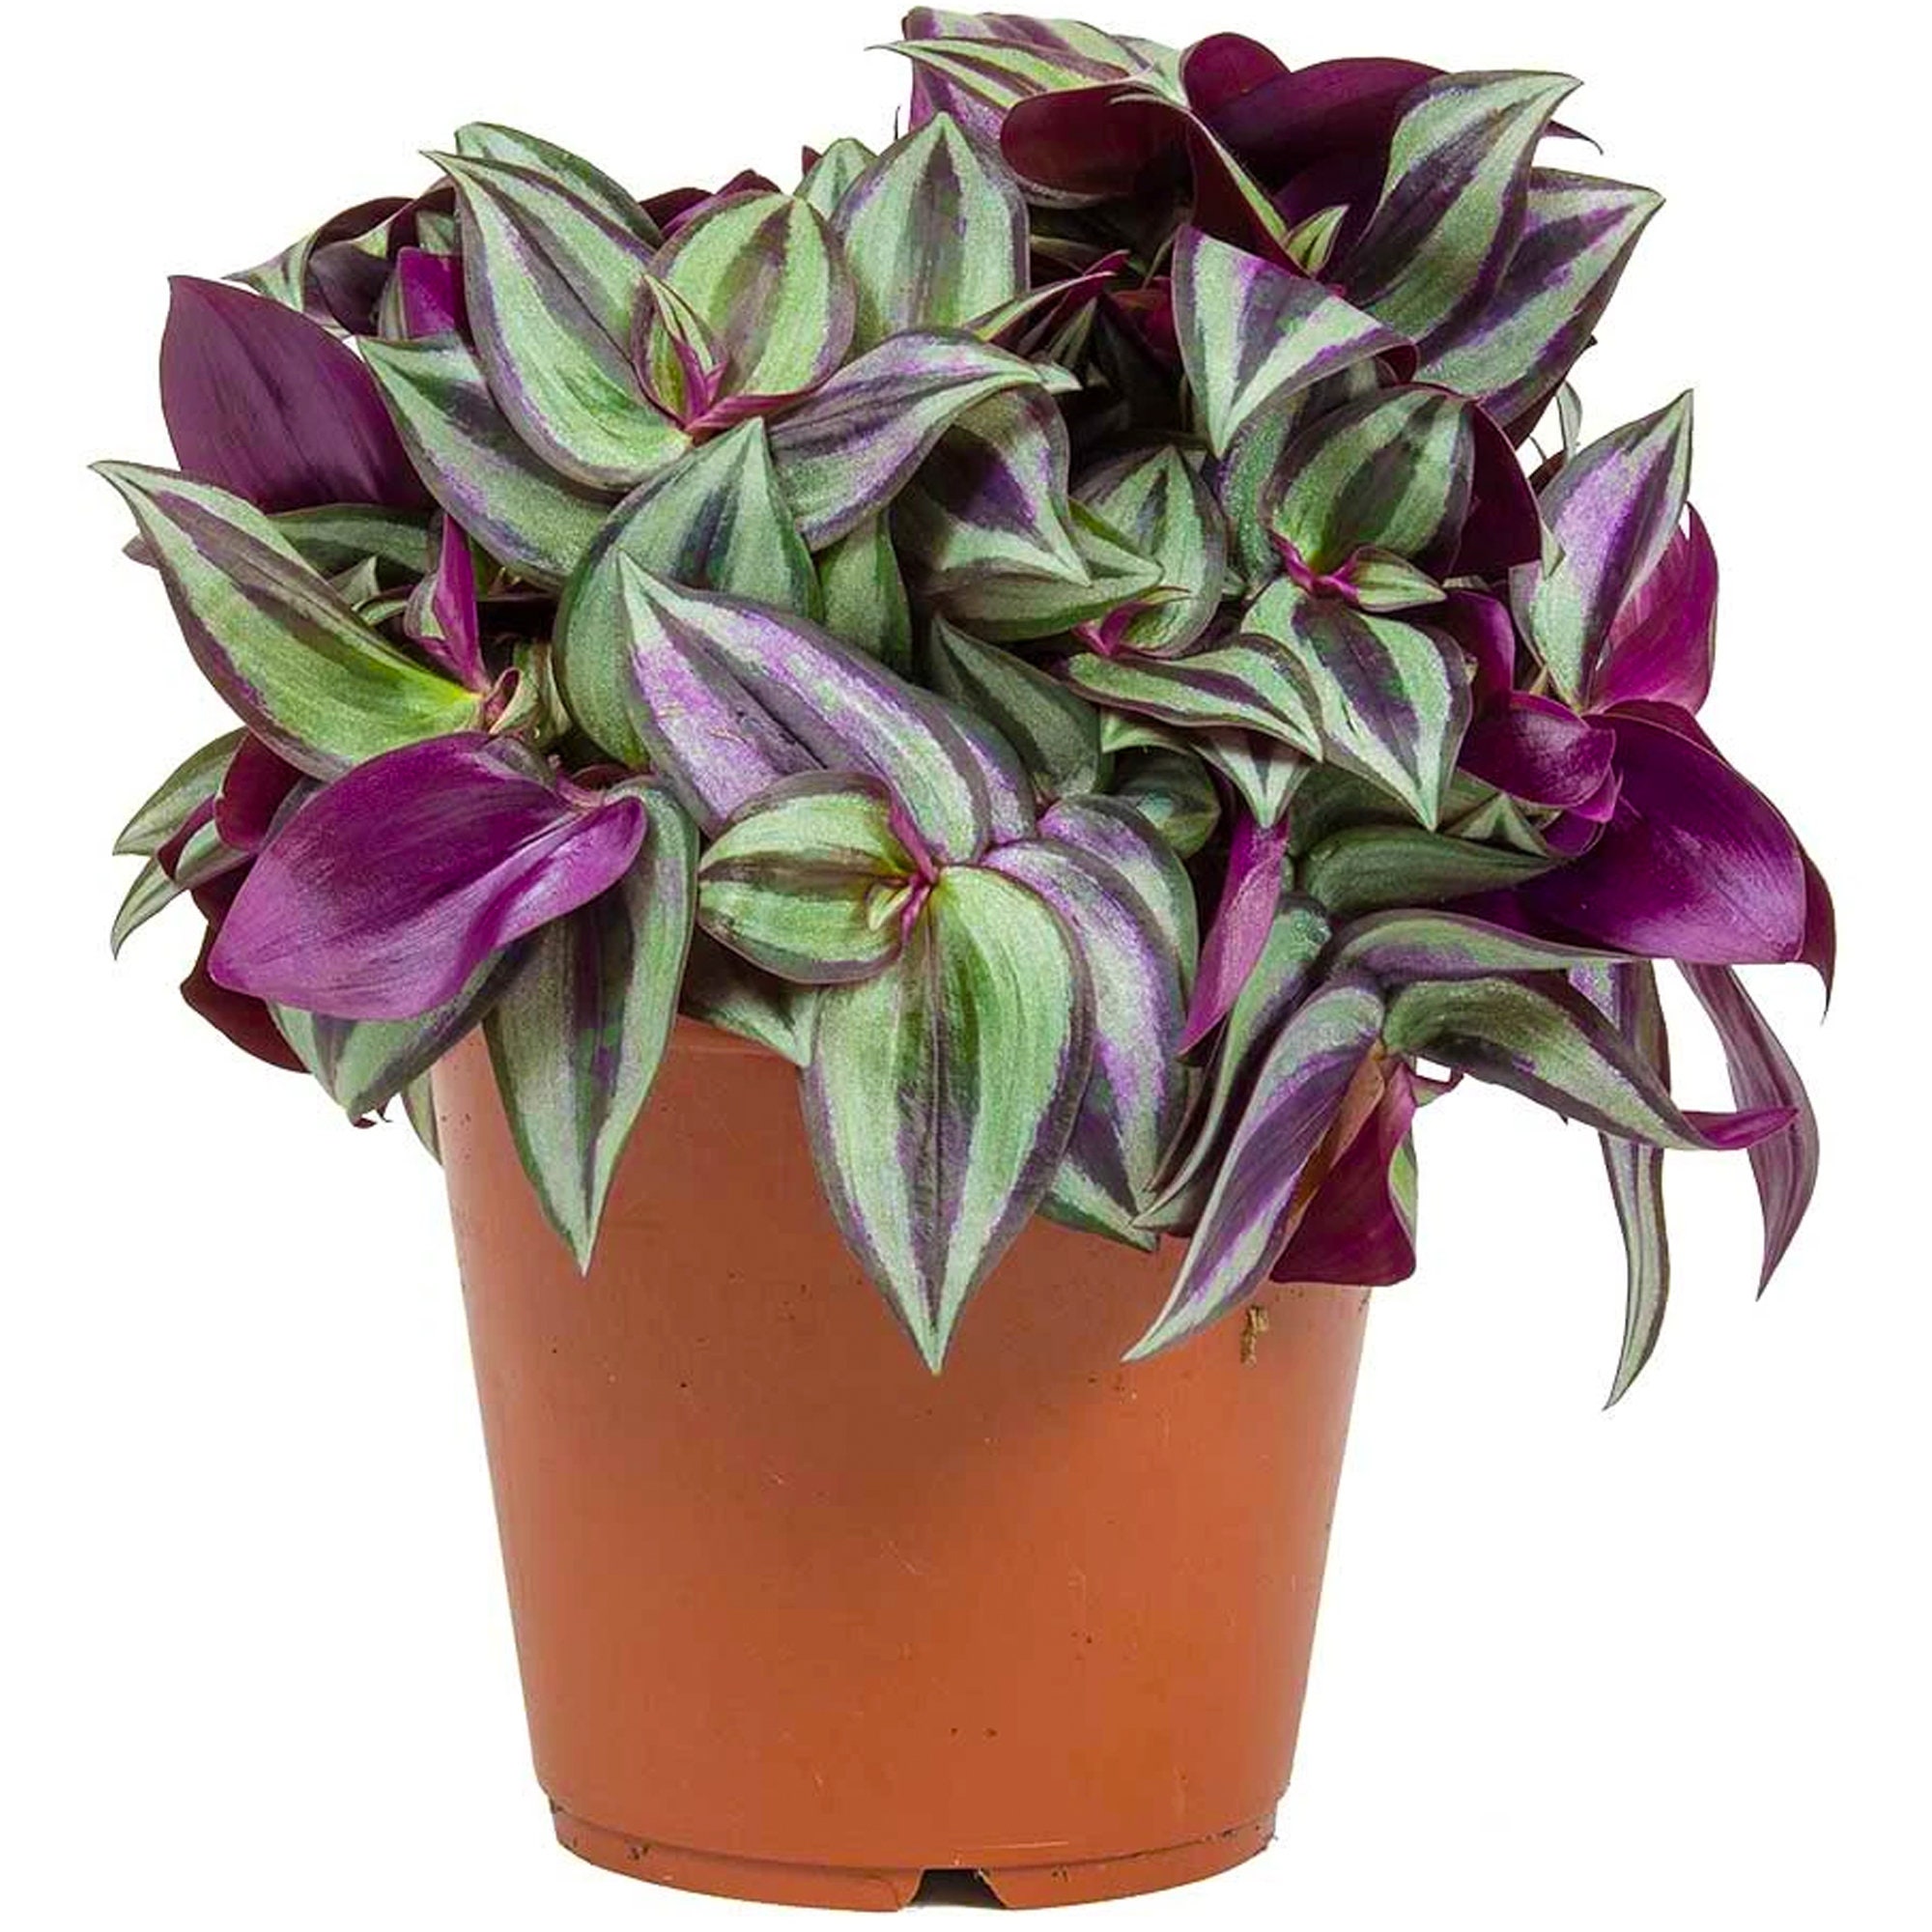 Wandering Jew plant superstition